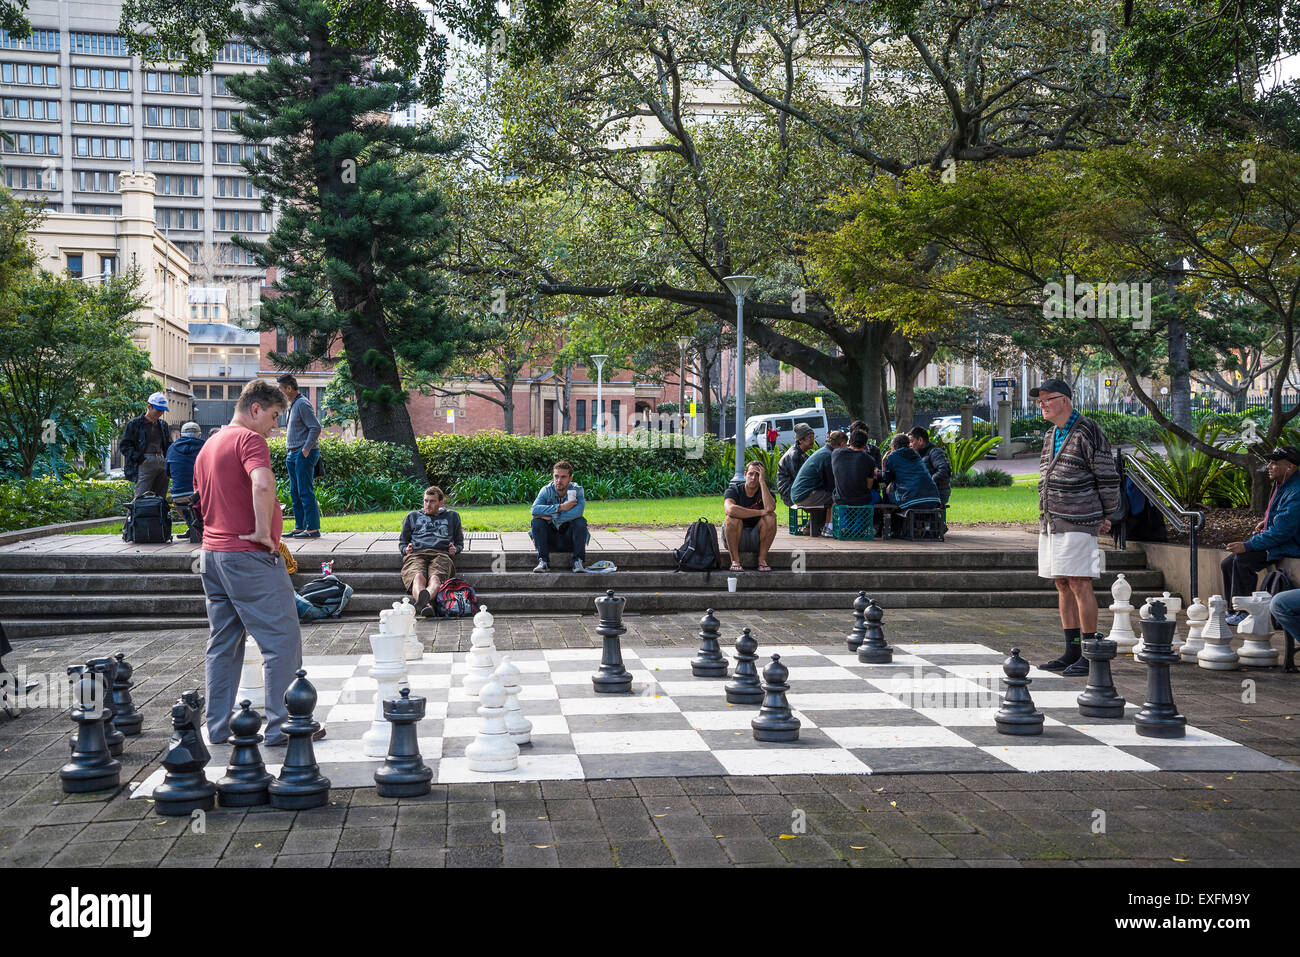 Hyde Park Chess Masters - Installed in 1972, this giant chess board stands  in the Nagoya Gardens of Hyde Park. : r/sydney